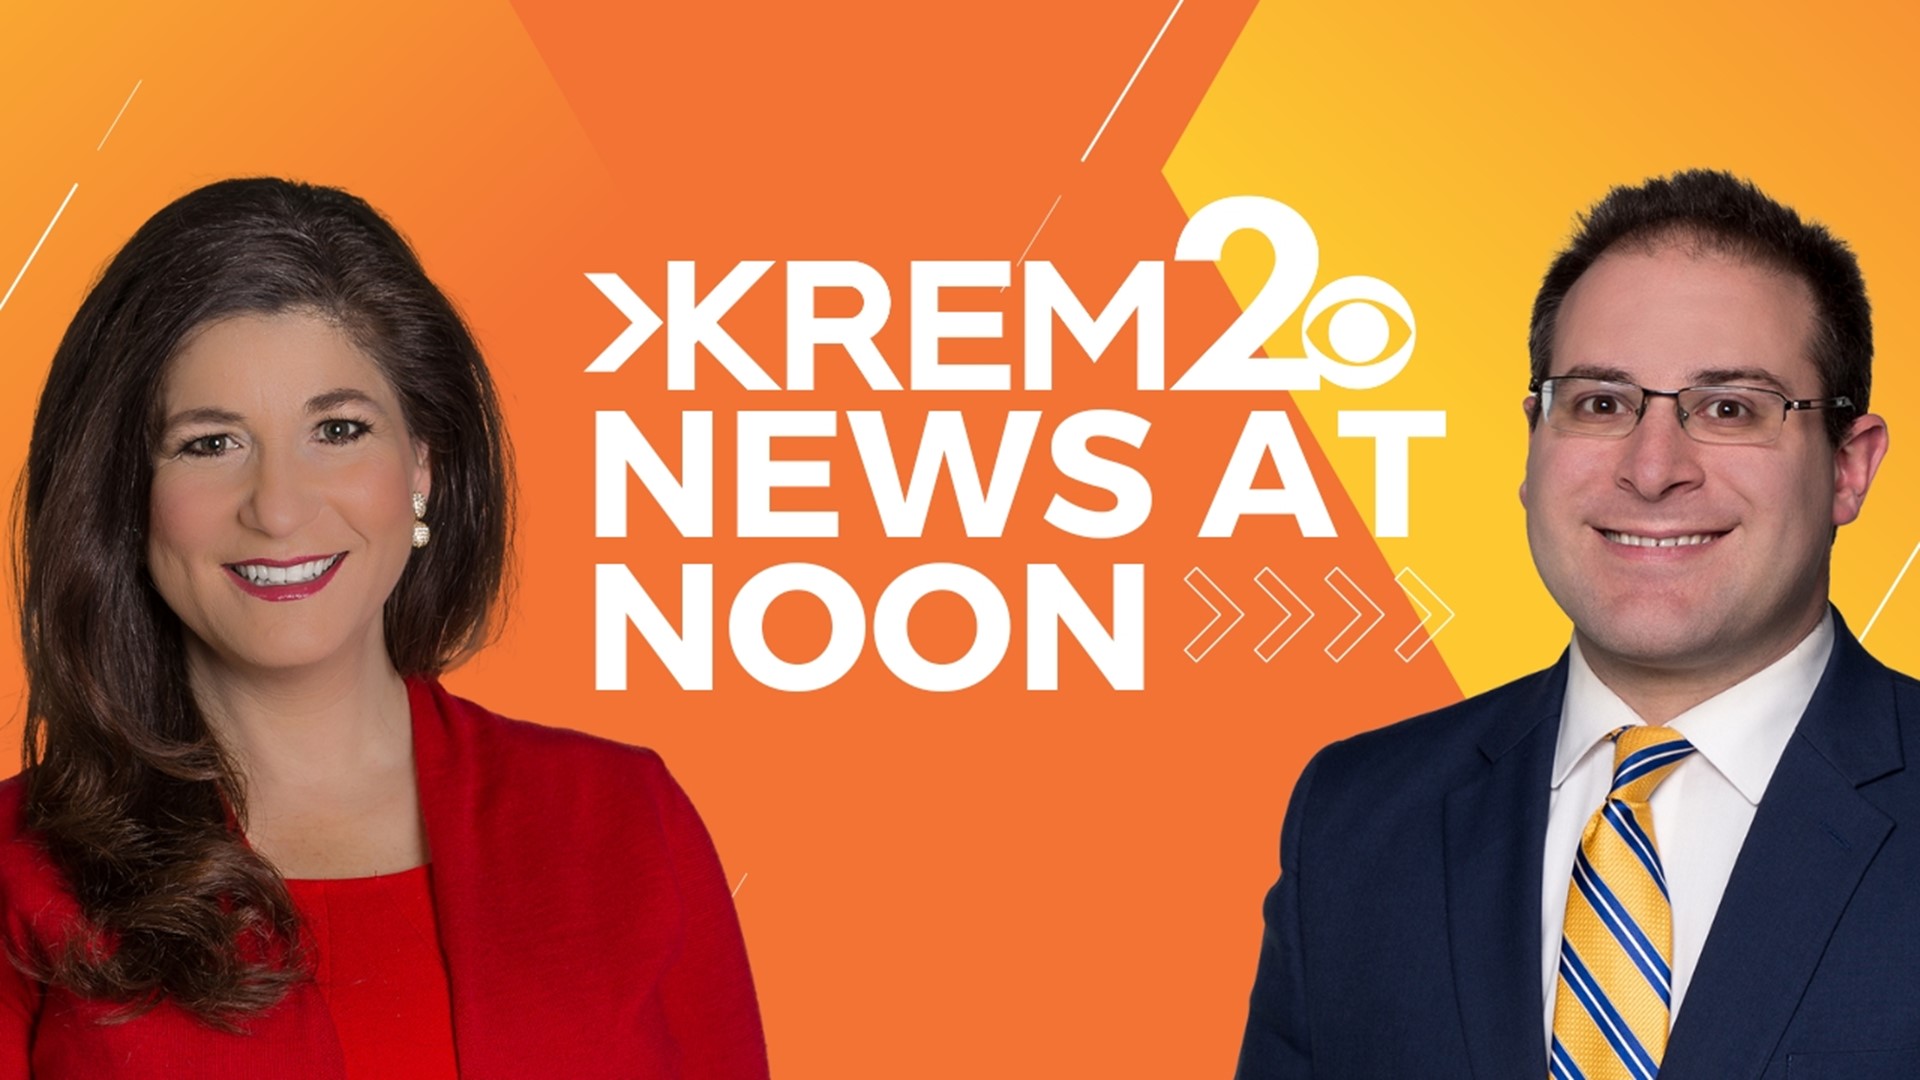 Firefighters investigating a house fire in the Garland District neighborhood & more KREM 2 News at Noon Headlines: Thursday, March 23, 2023